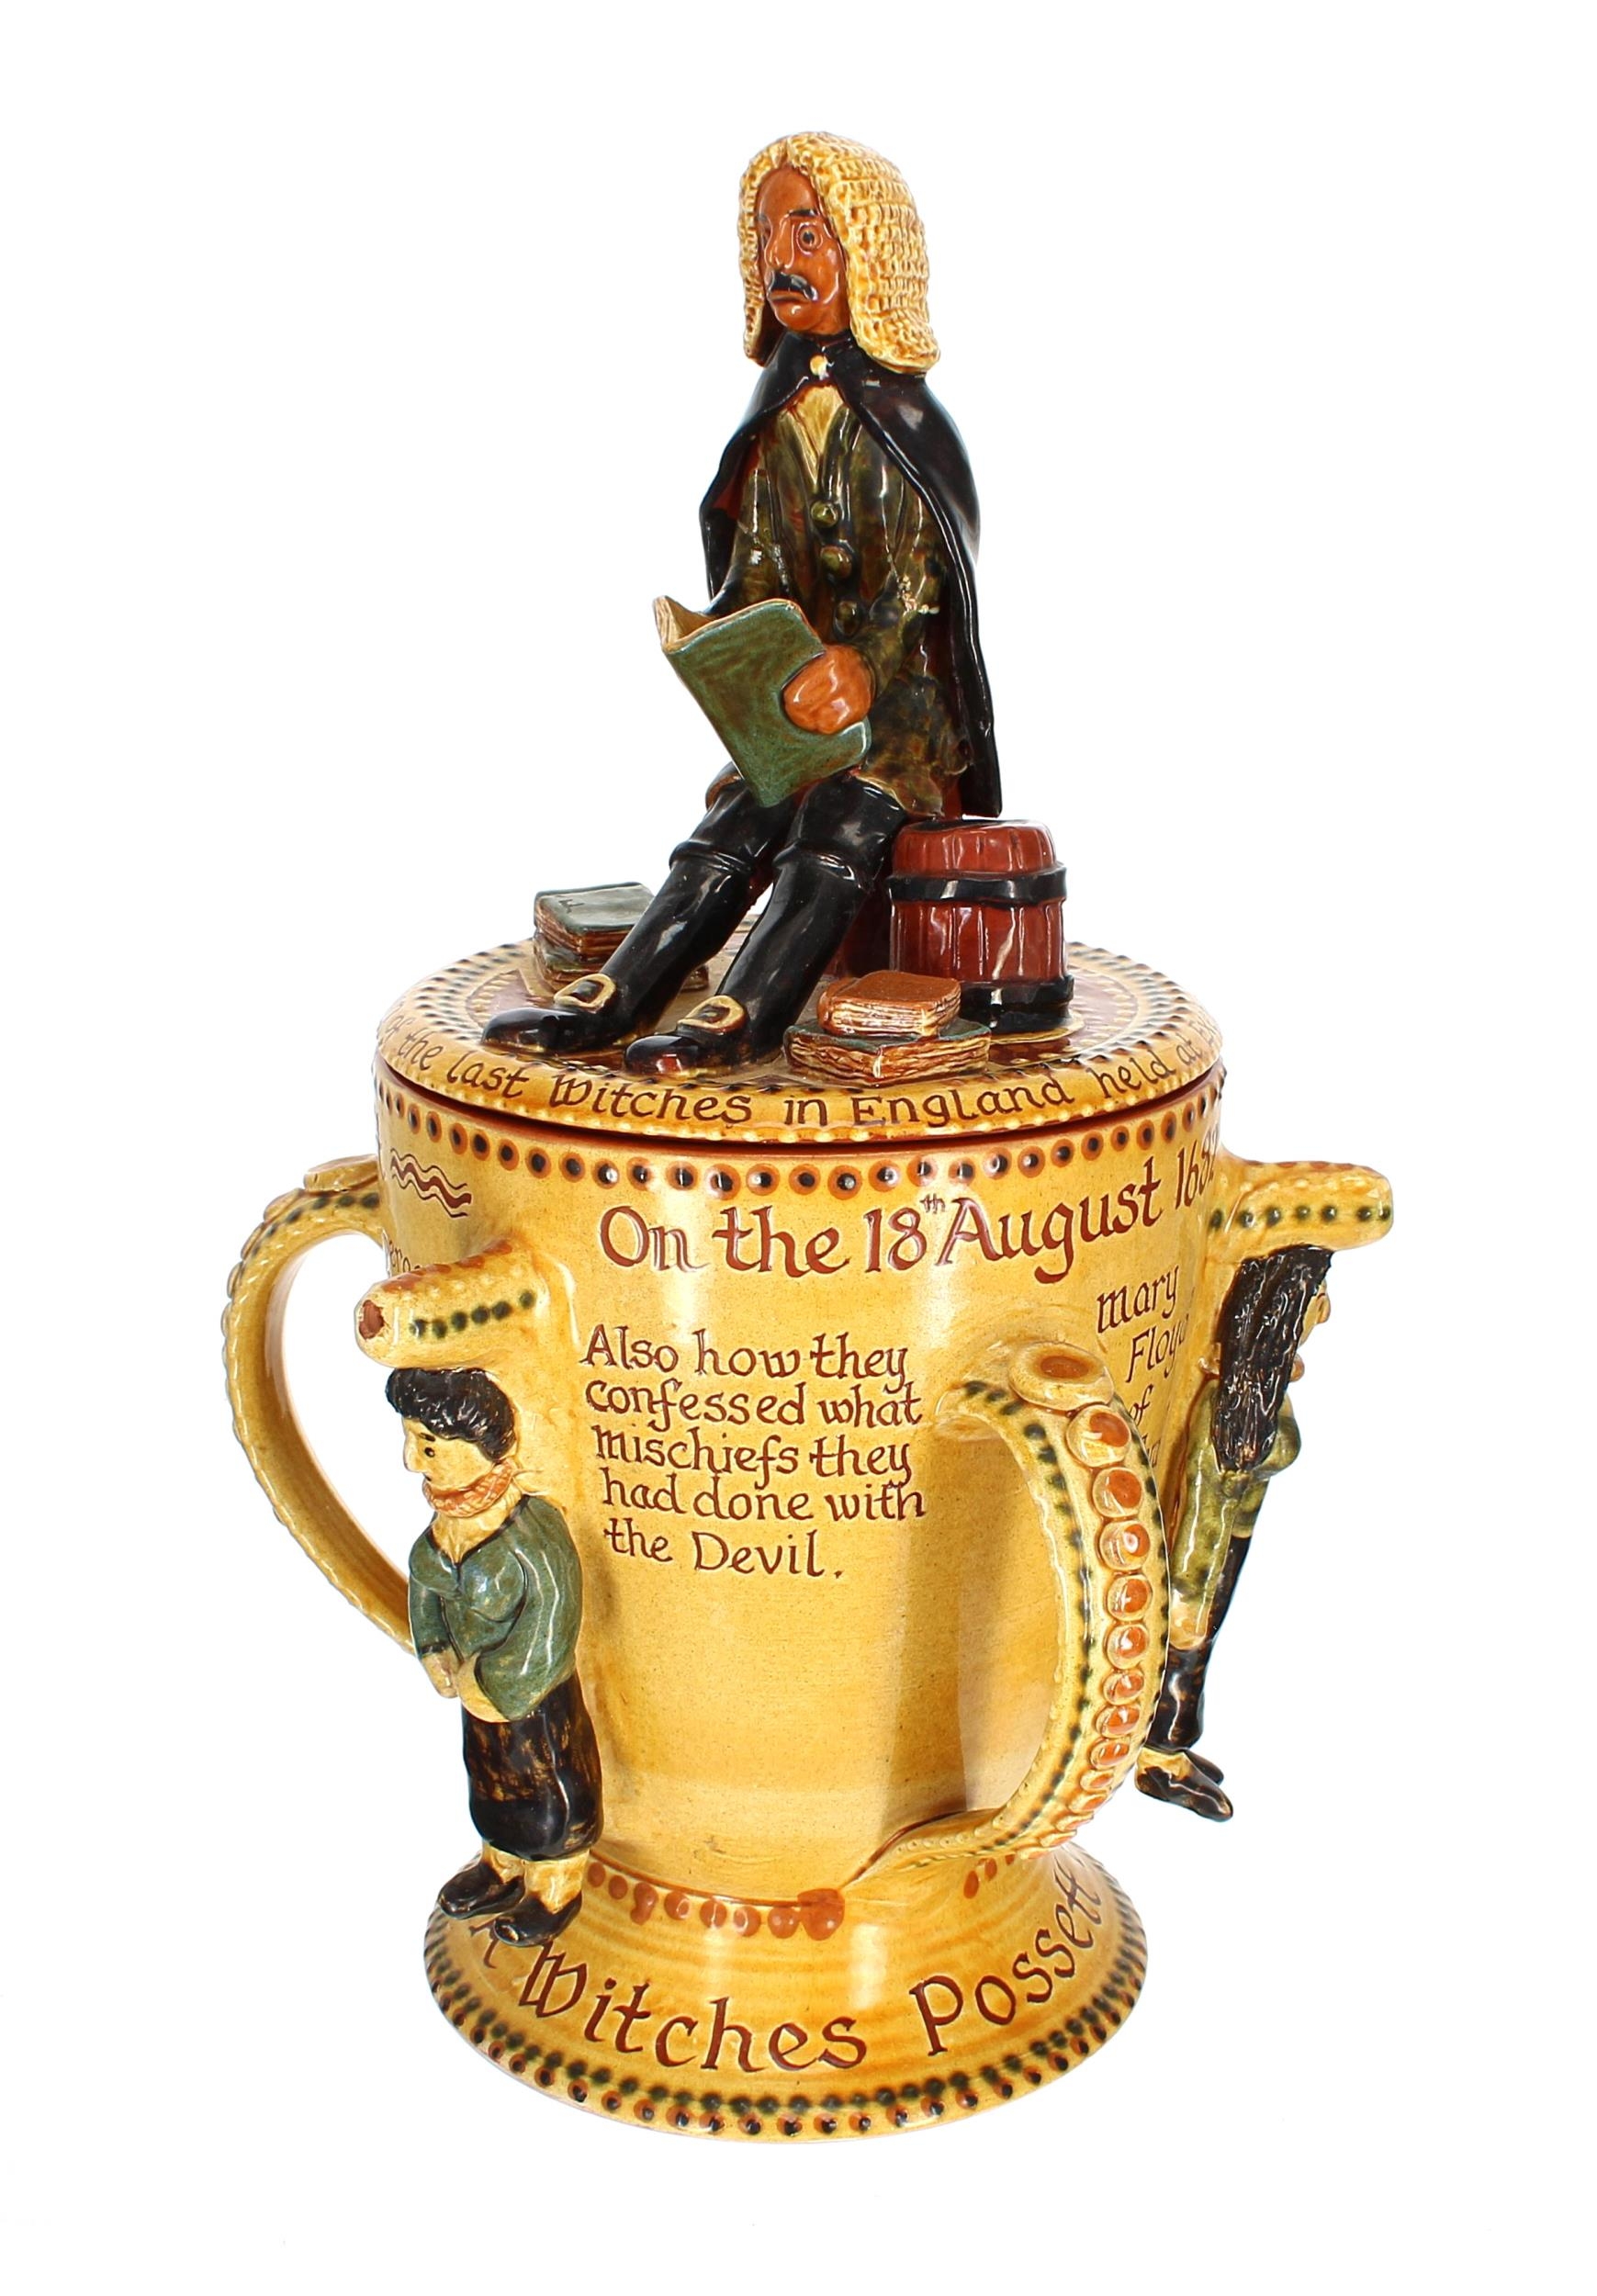 Glazed terracotta 'A Witches Possett Pot' by Harry Juniper of Bideford,  commemorating the trial and